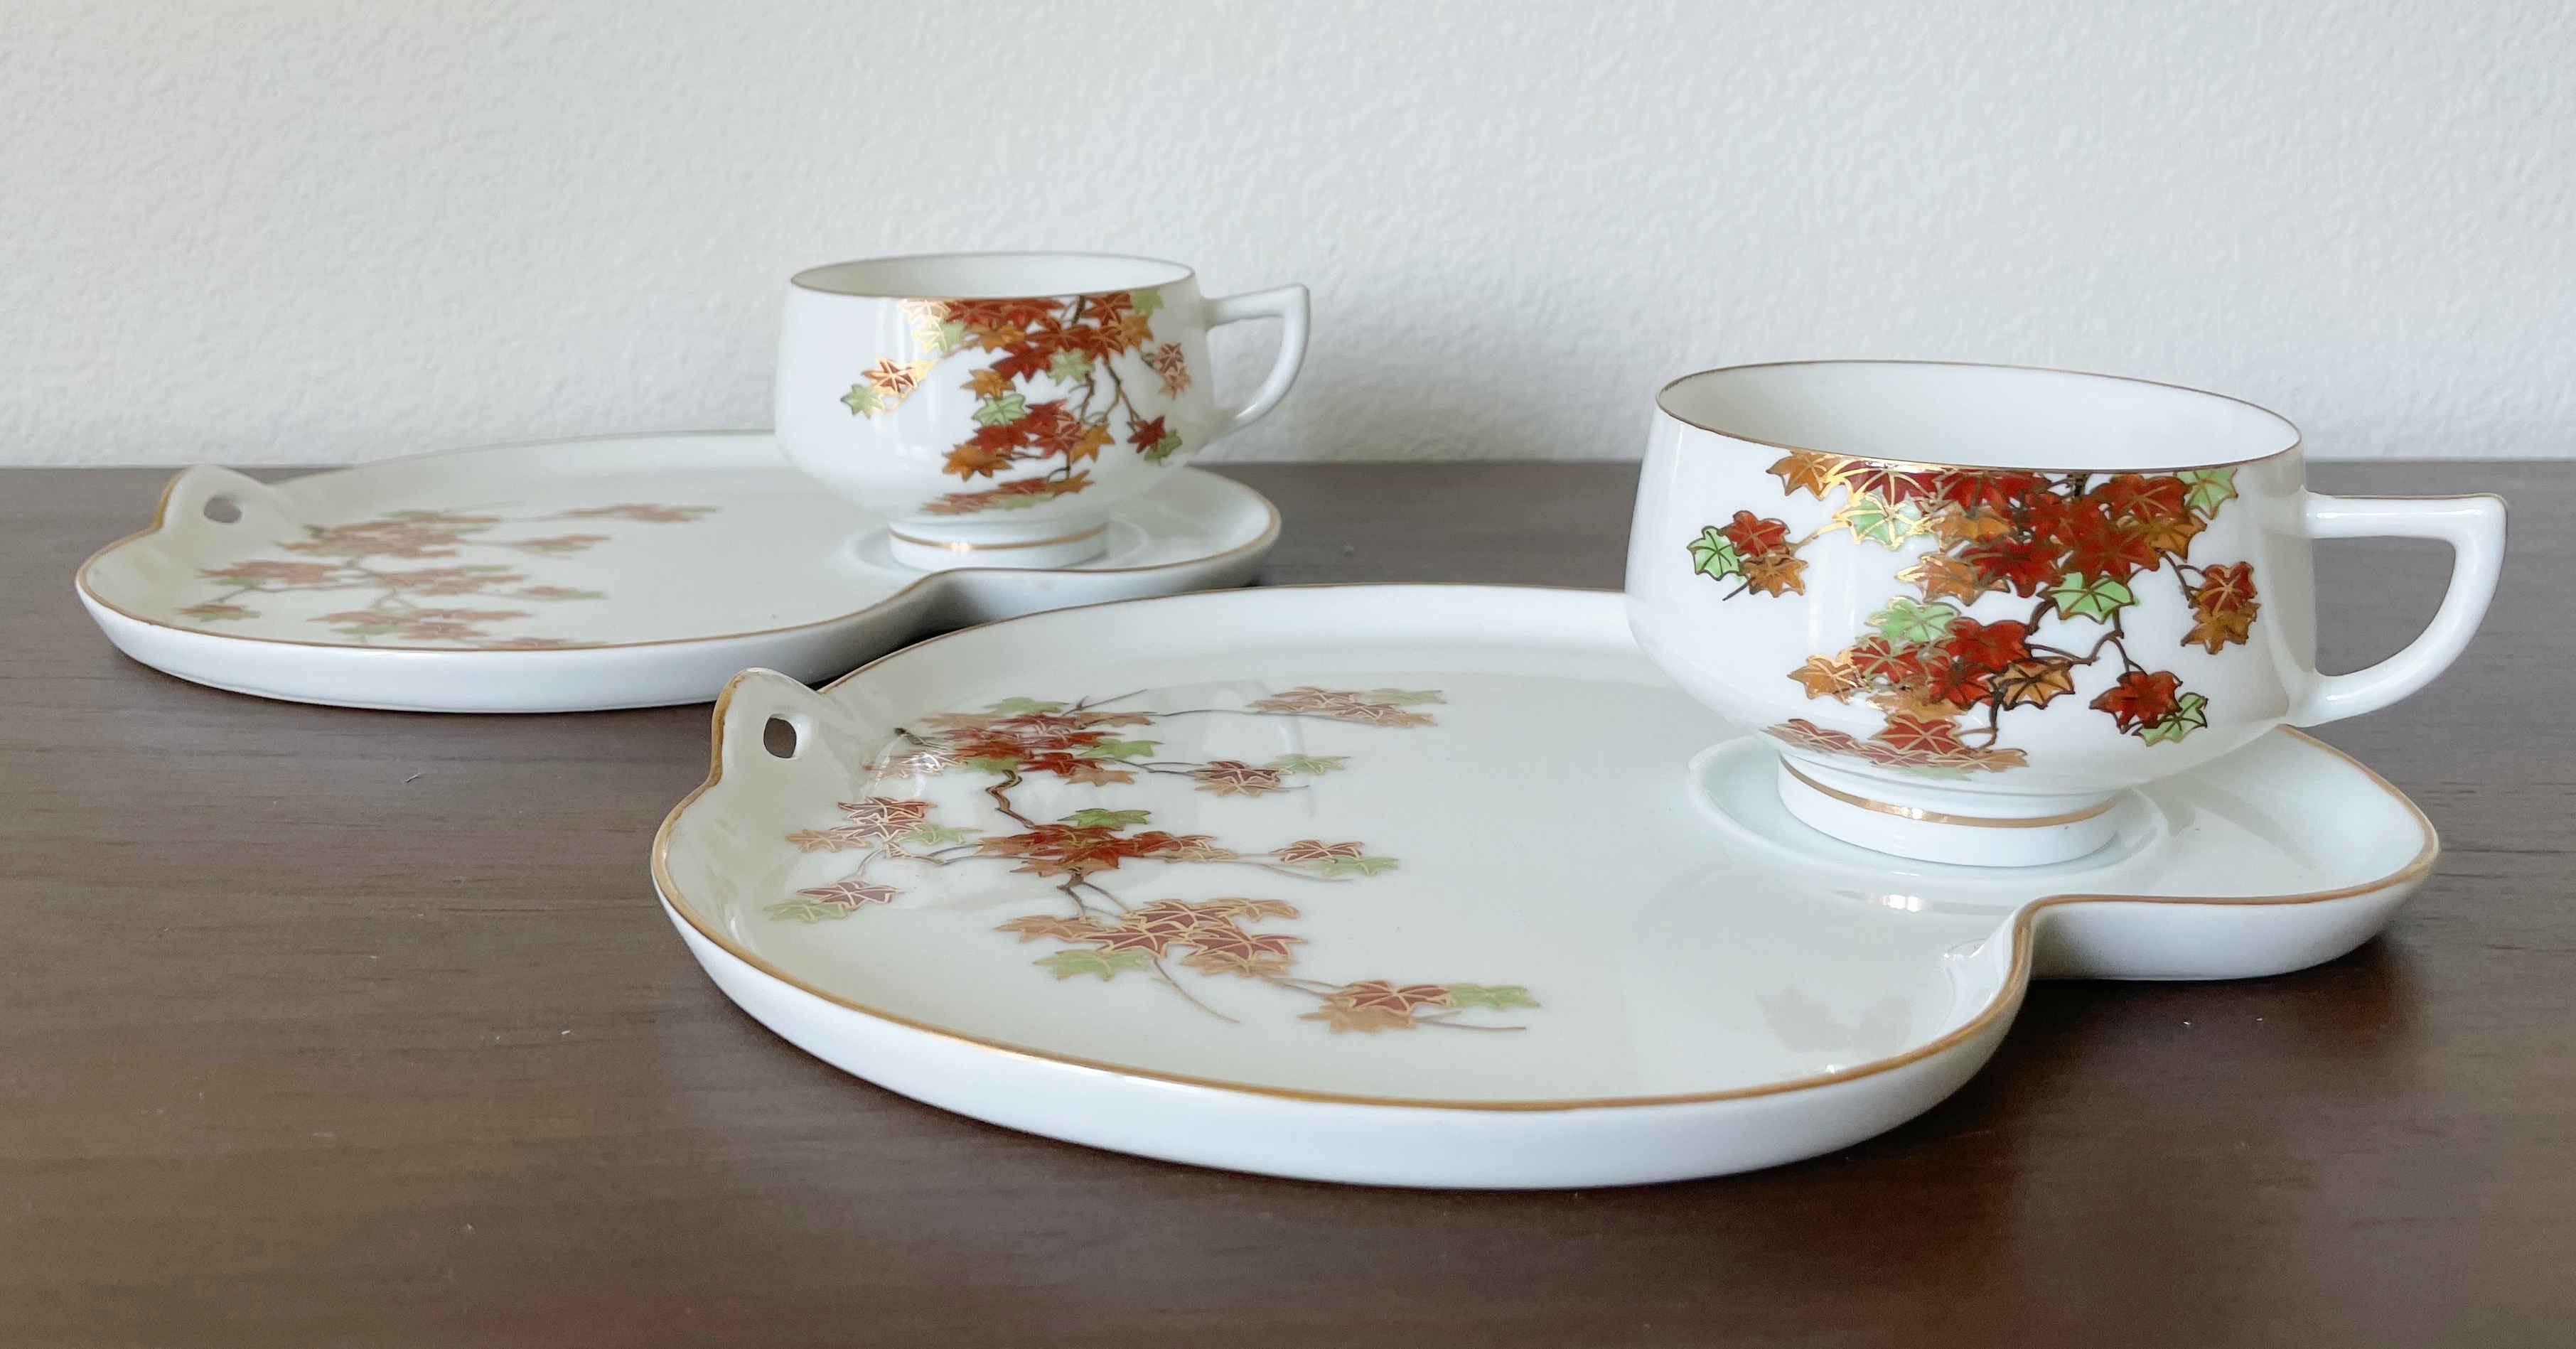 Vintage Koshida tray and teacup set with hand painted maple leaves / Made in Japan circa 1960s
Tea cups feature raised embossed lithophane image of Geisha on inside bottoms
2 trays, width 9 inches, depth 8 inches
2 teacups, width 4.25 inches, depth